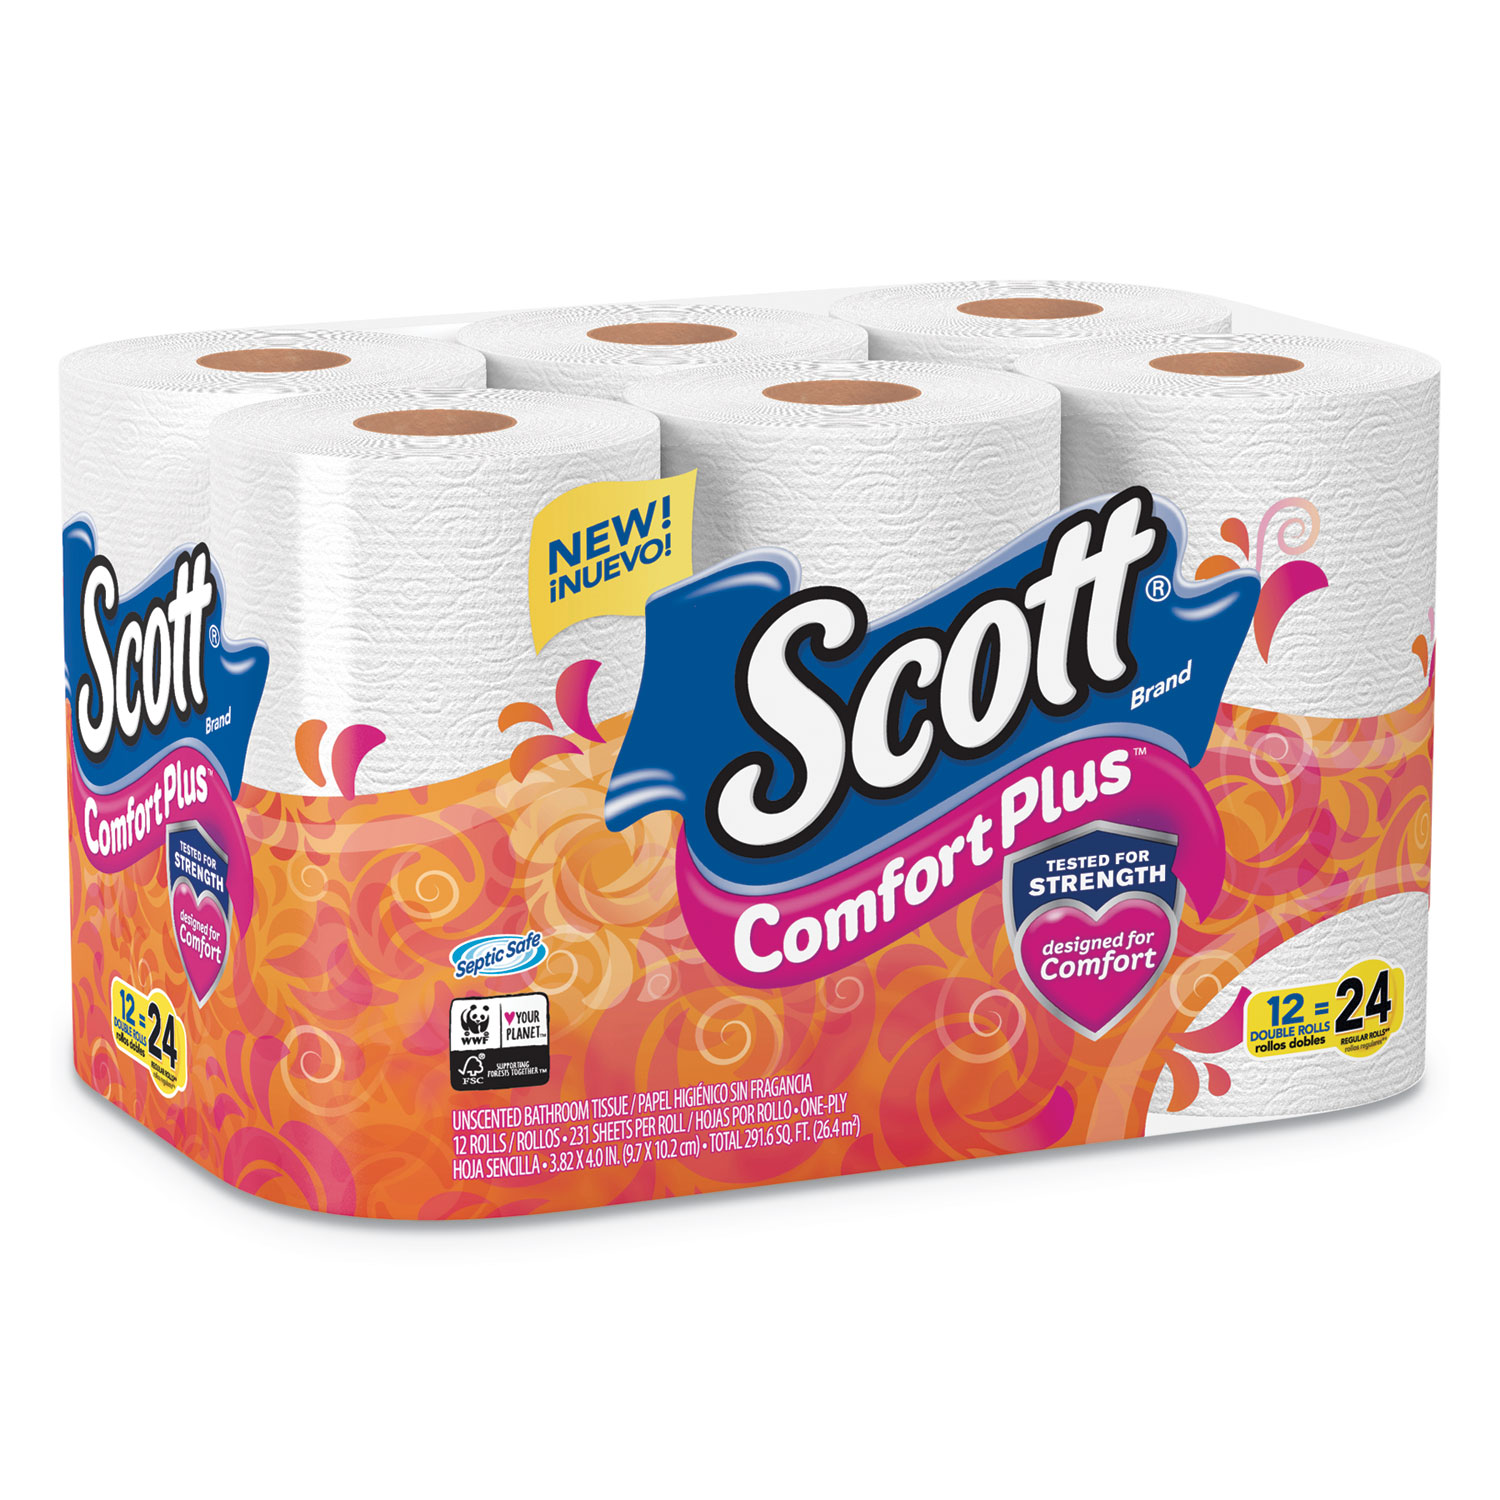 Scotts ComfortPlus Toilet Paper, Double Roll, 1-Ply, , 12 Roll/Pack